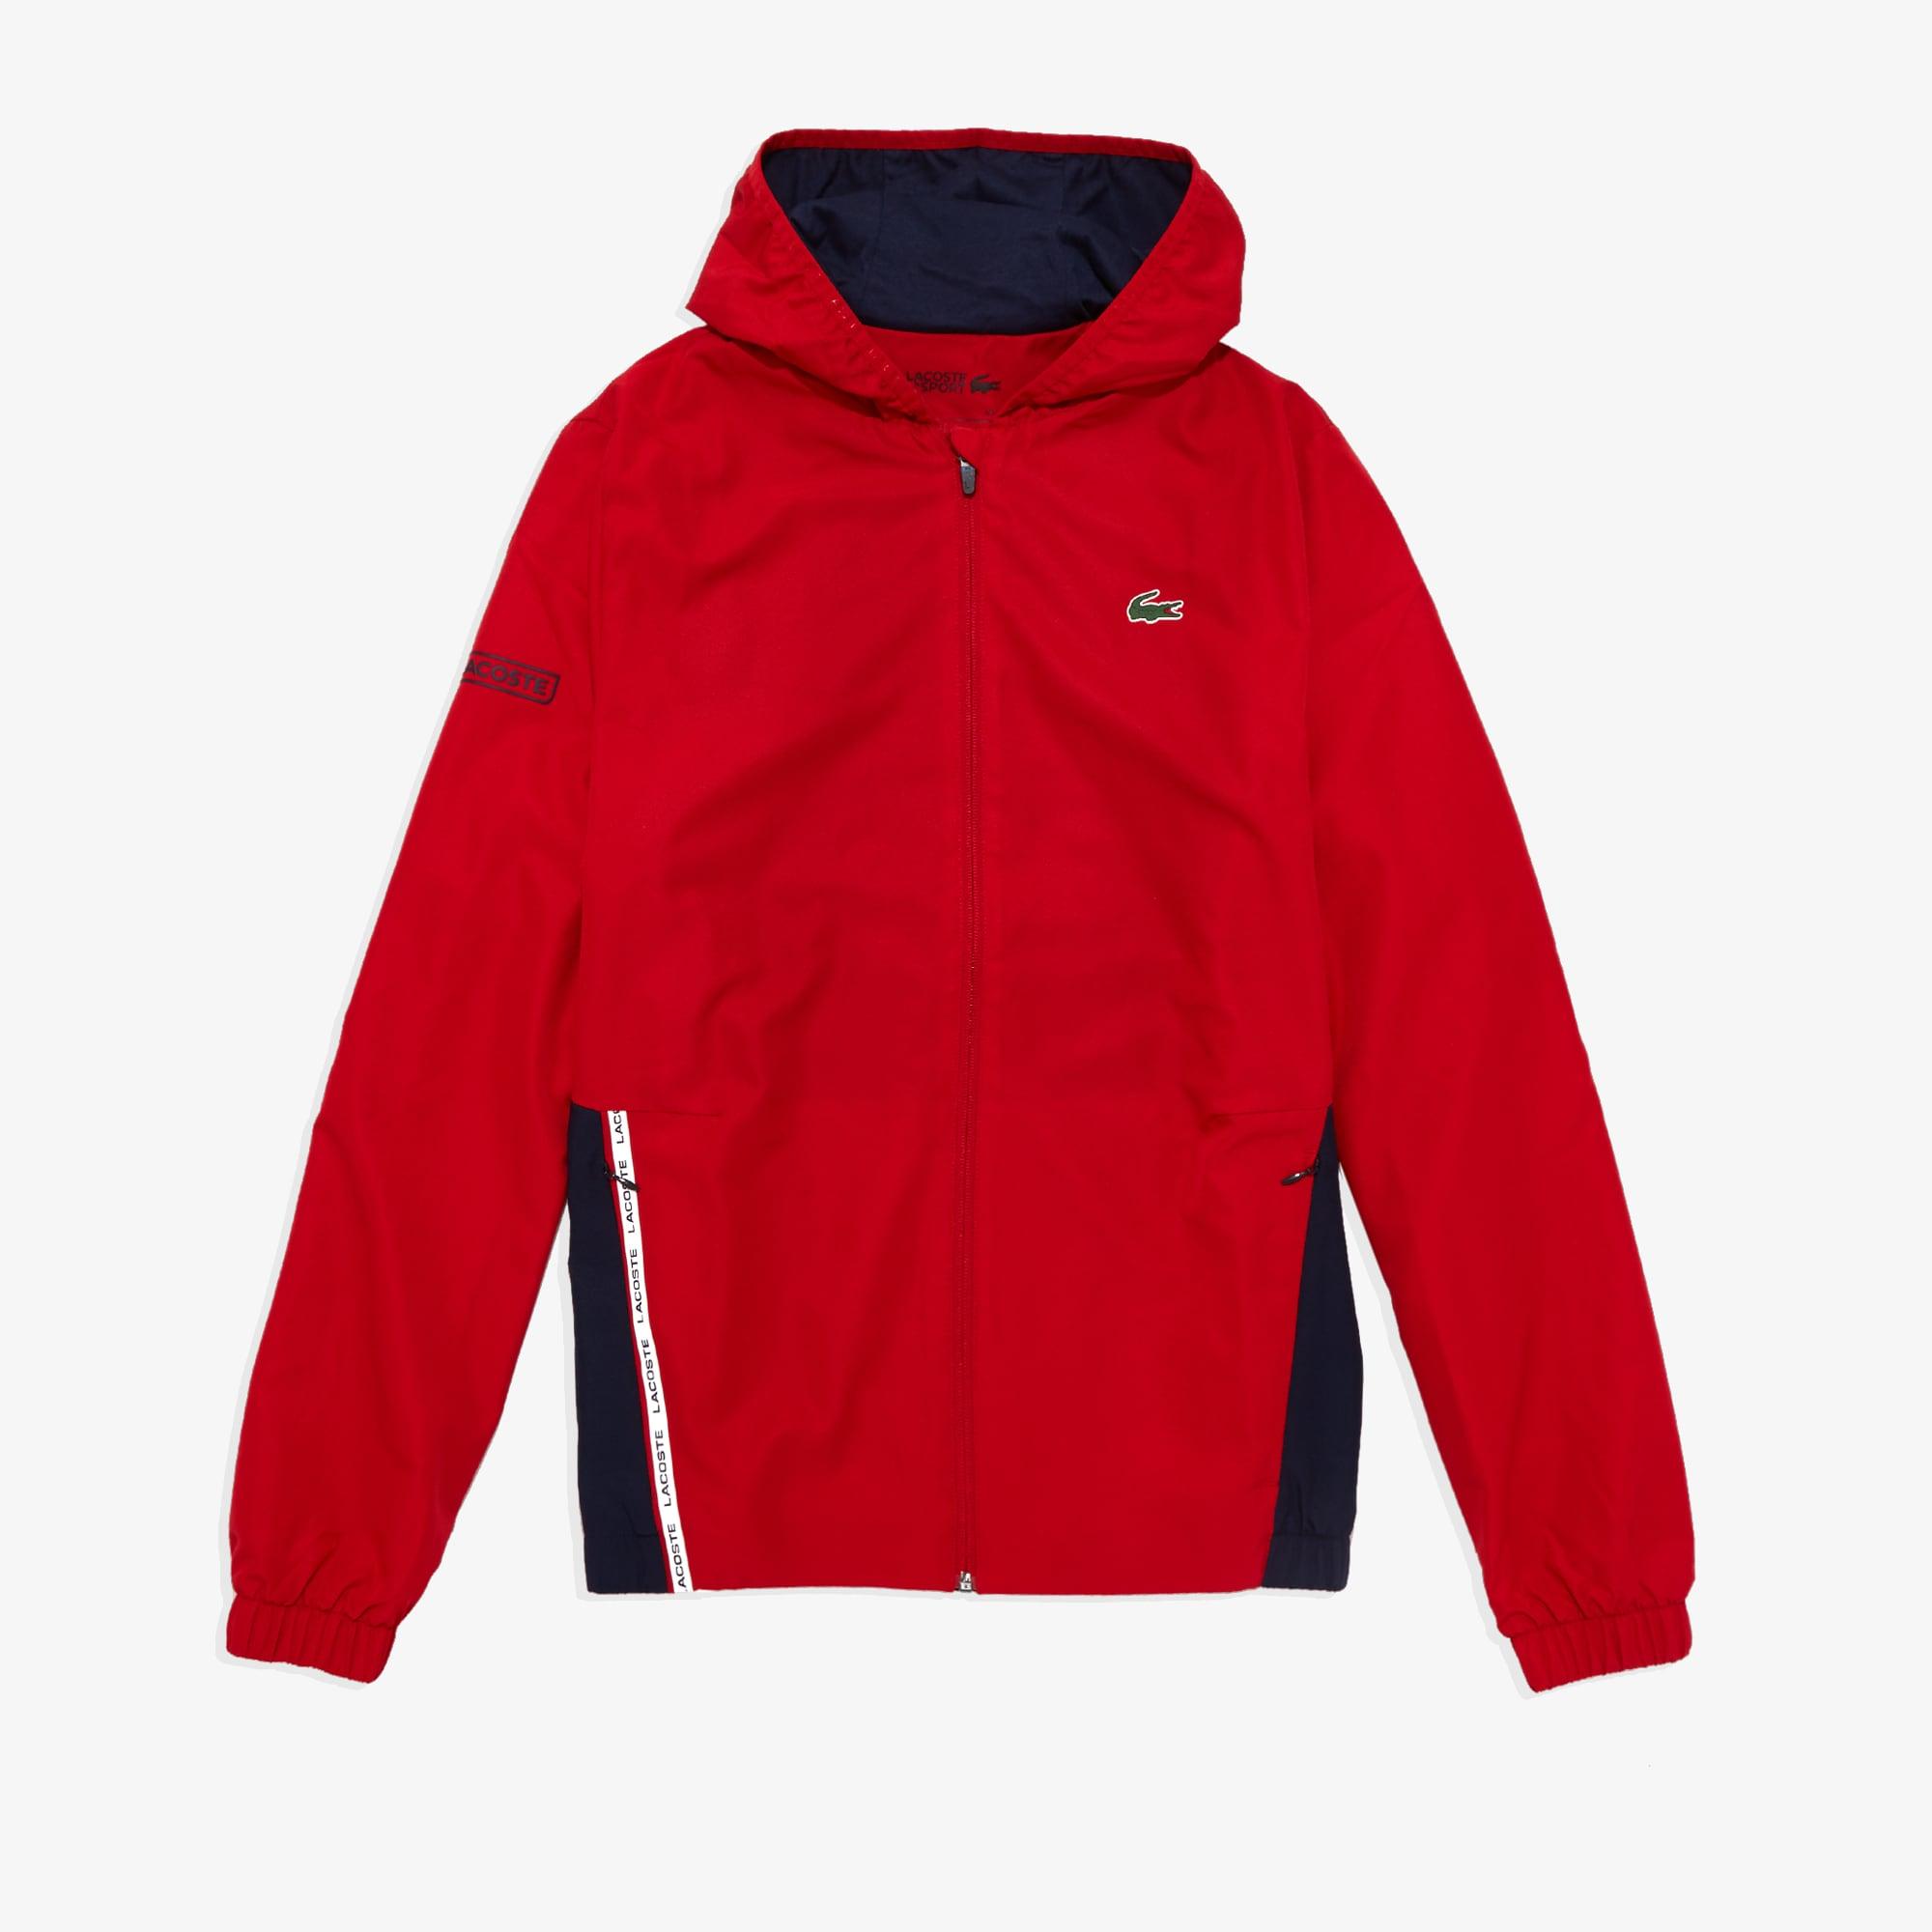 Lacoste Sport Two-tone Tennis Track Suit in Red,Navy Blue,White (Red ...